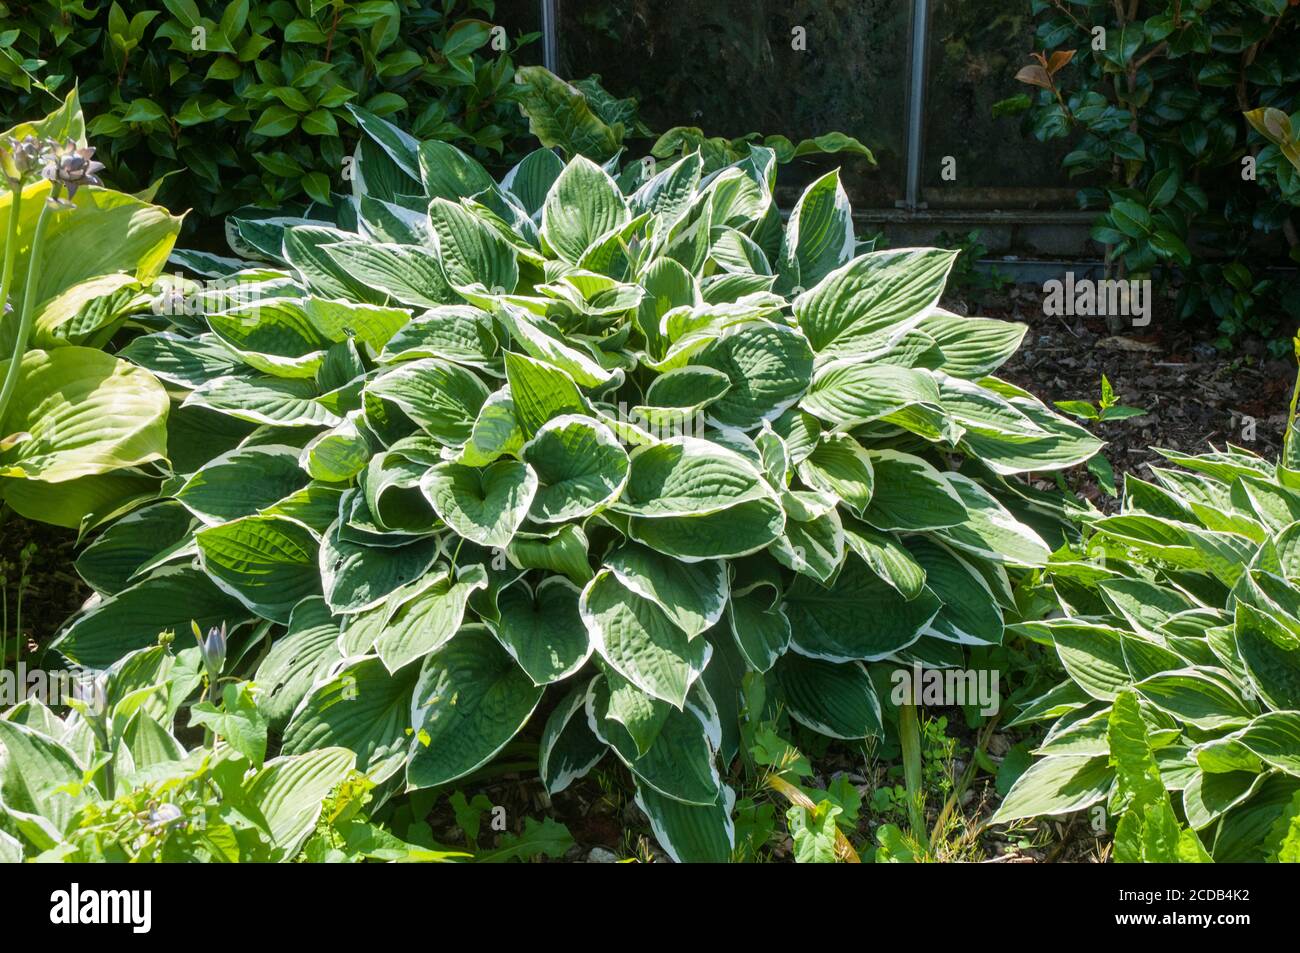 Large Hosta plant Carol showing green and white variegation on irregularly margined leaves a fully hardy clump forming herbaceous perennial Stock Photo